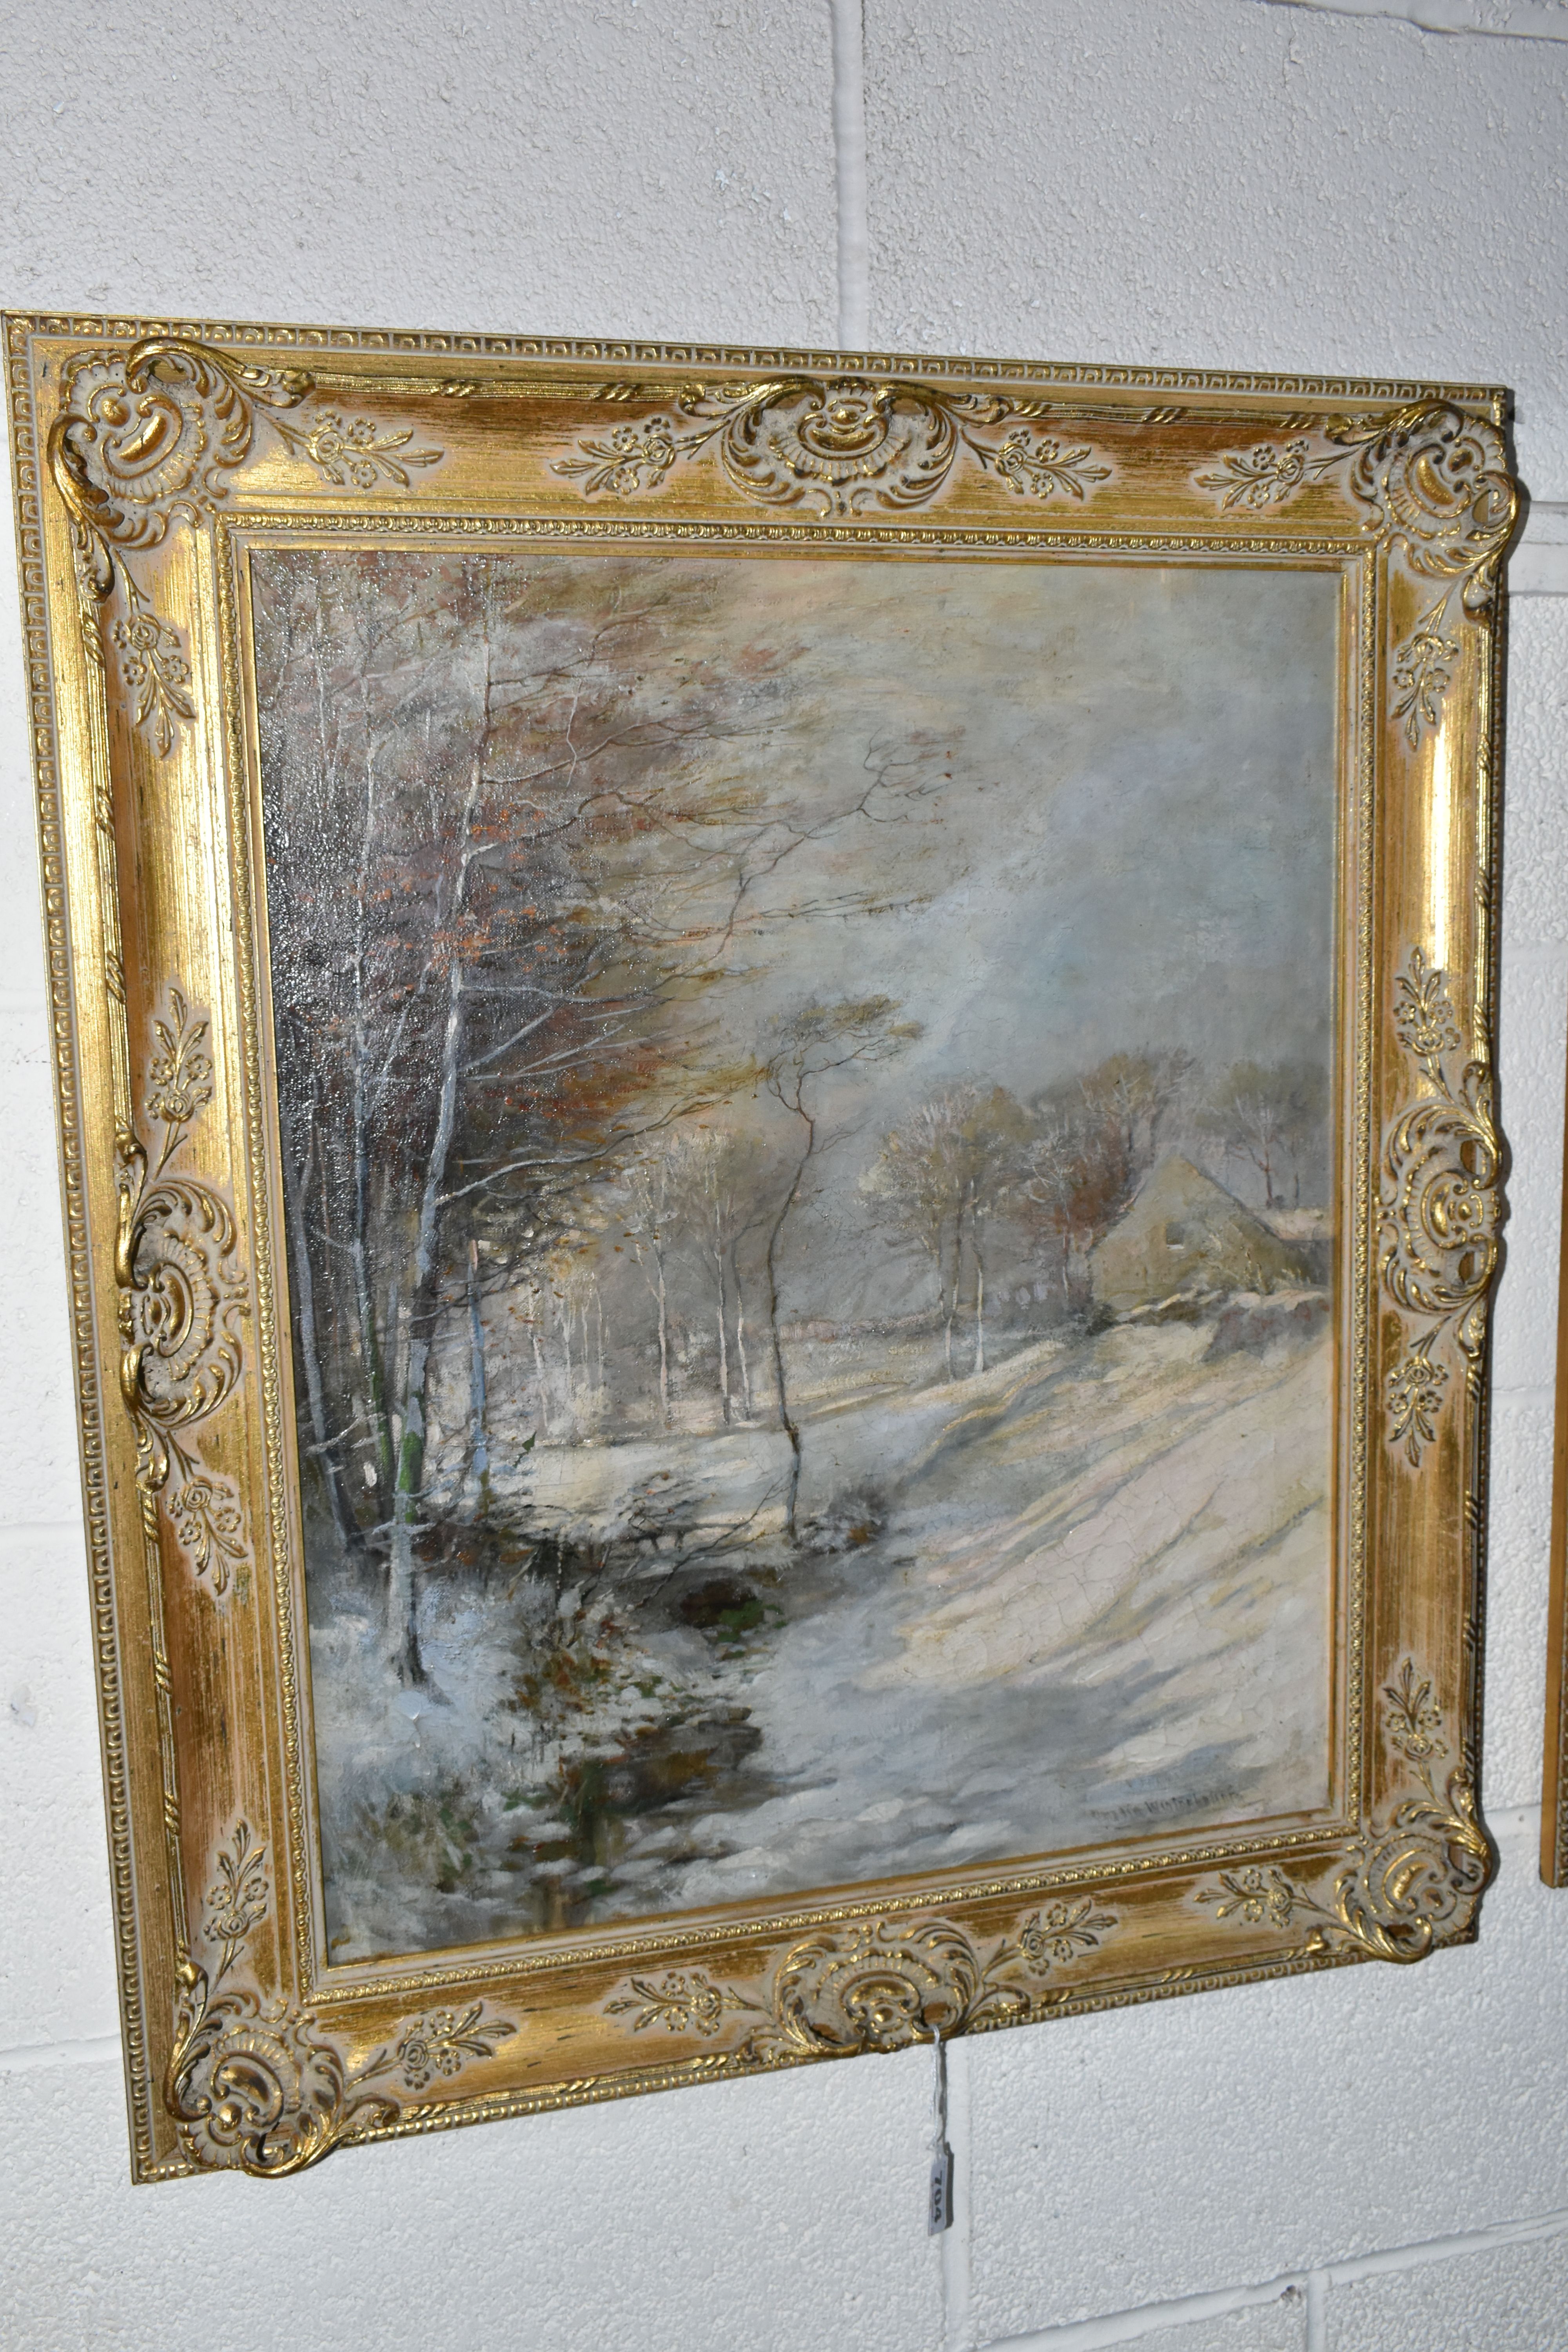 AUSTIN WINTERBOTTOM (1860-1919) TWO WINTER LANDSCAPES, the first depicts a stream running through - Image 2 of 10